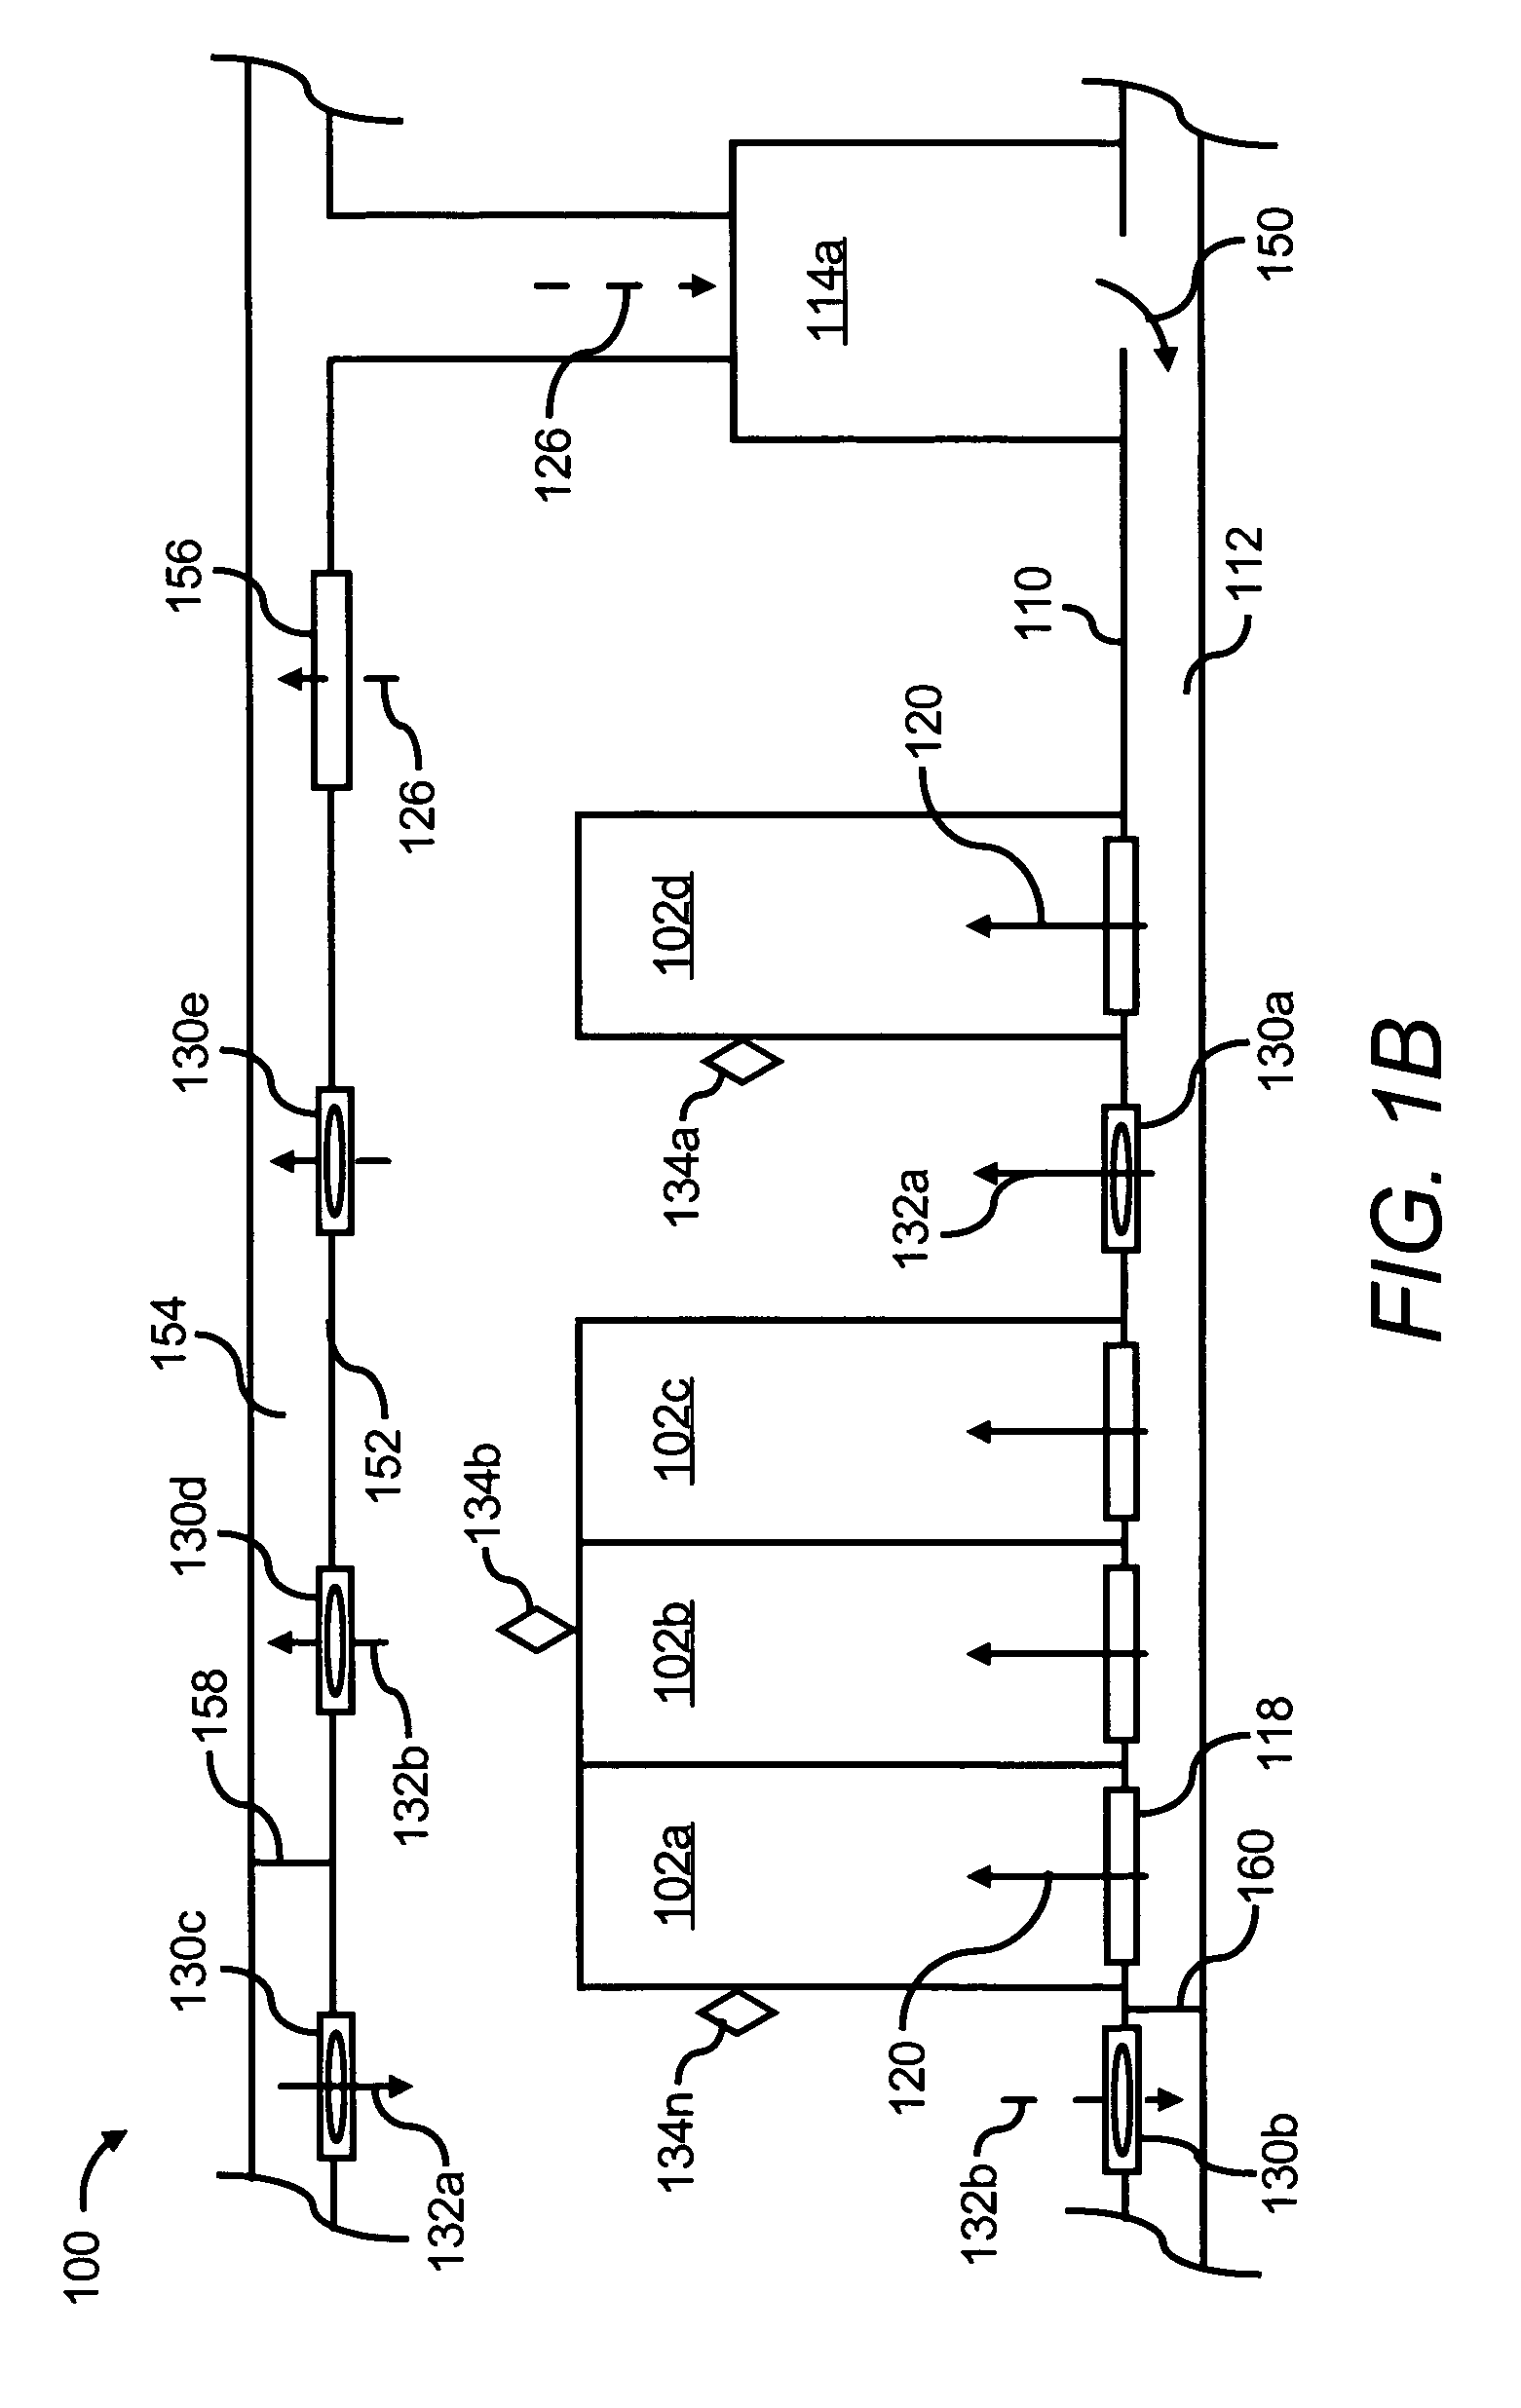 Air re-circulation effect reduction system